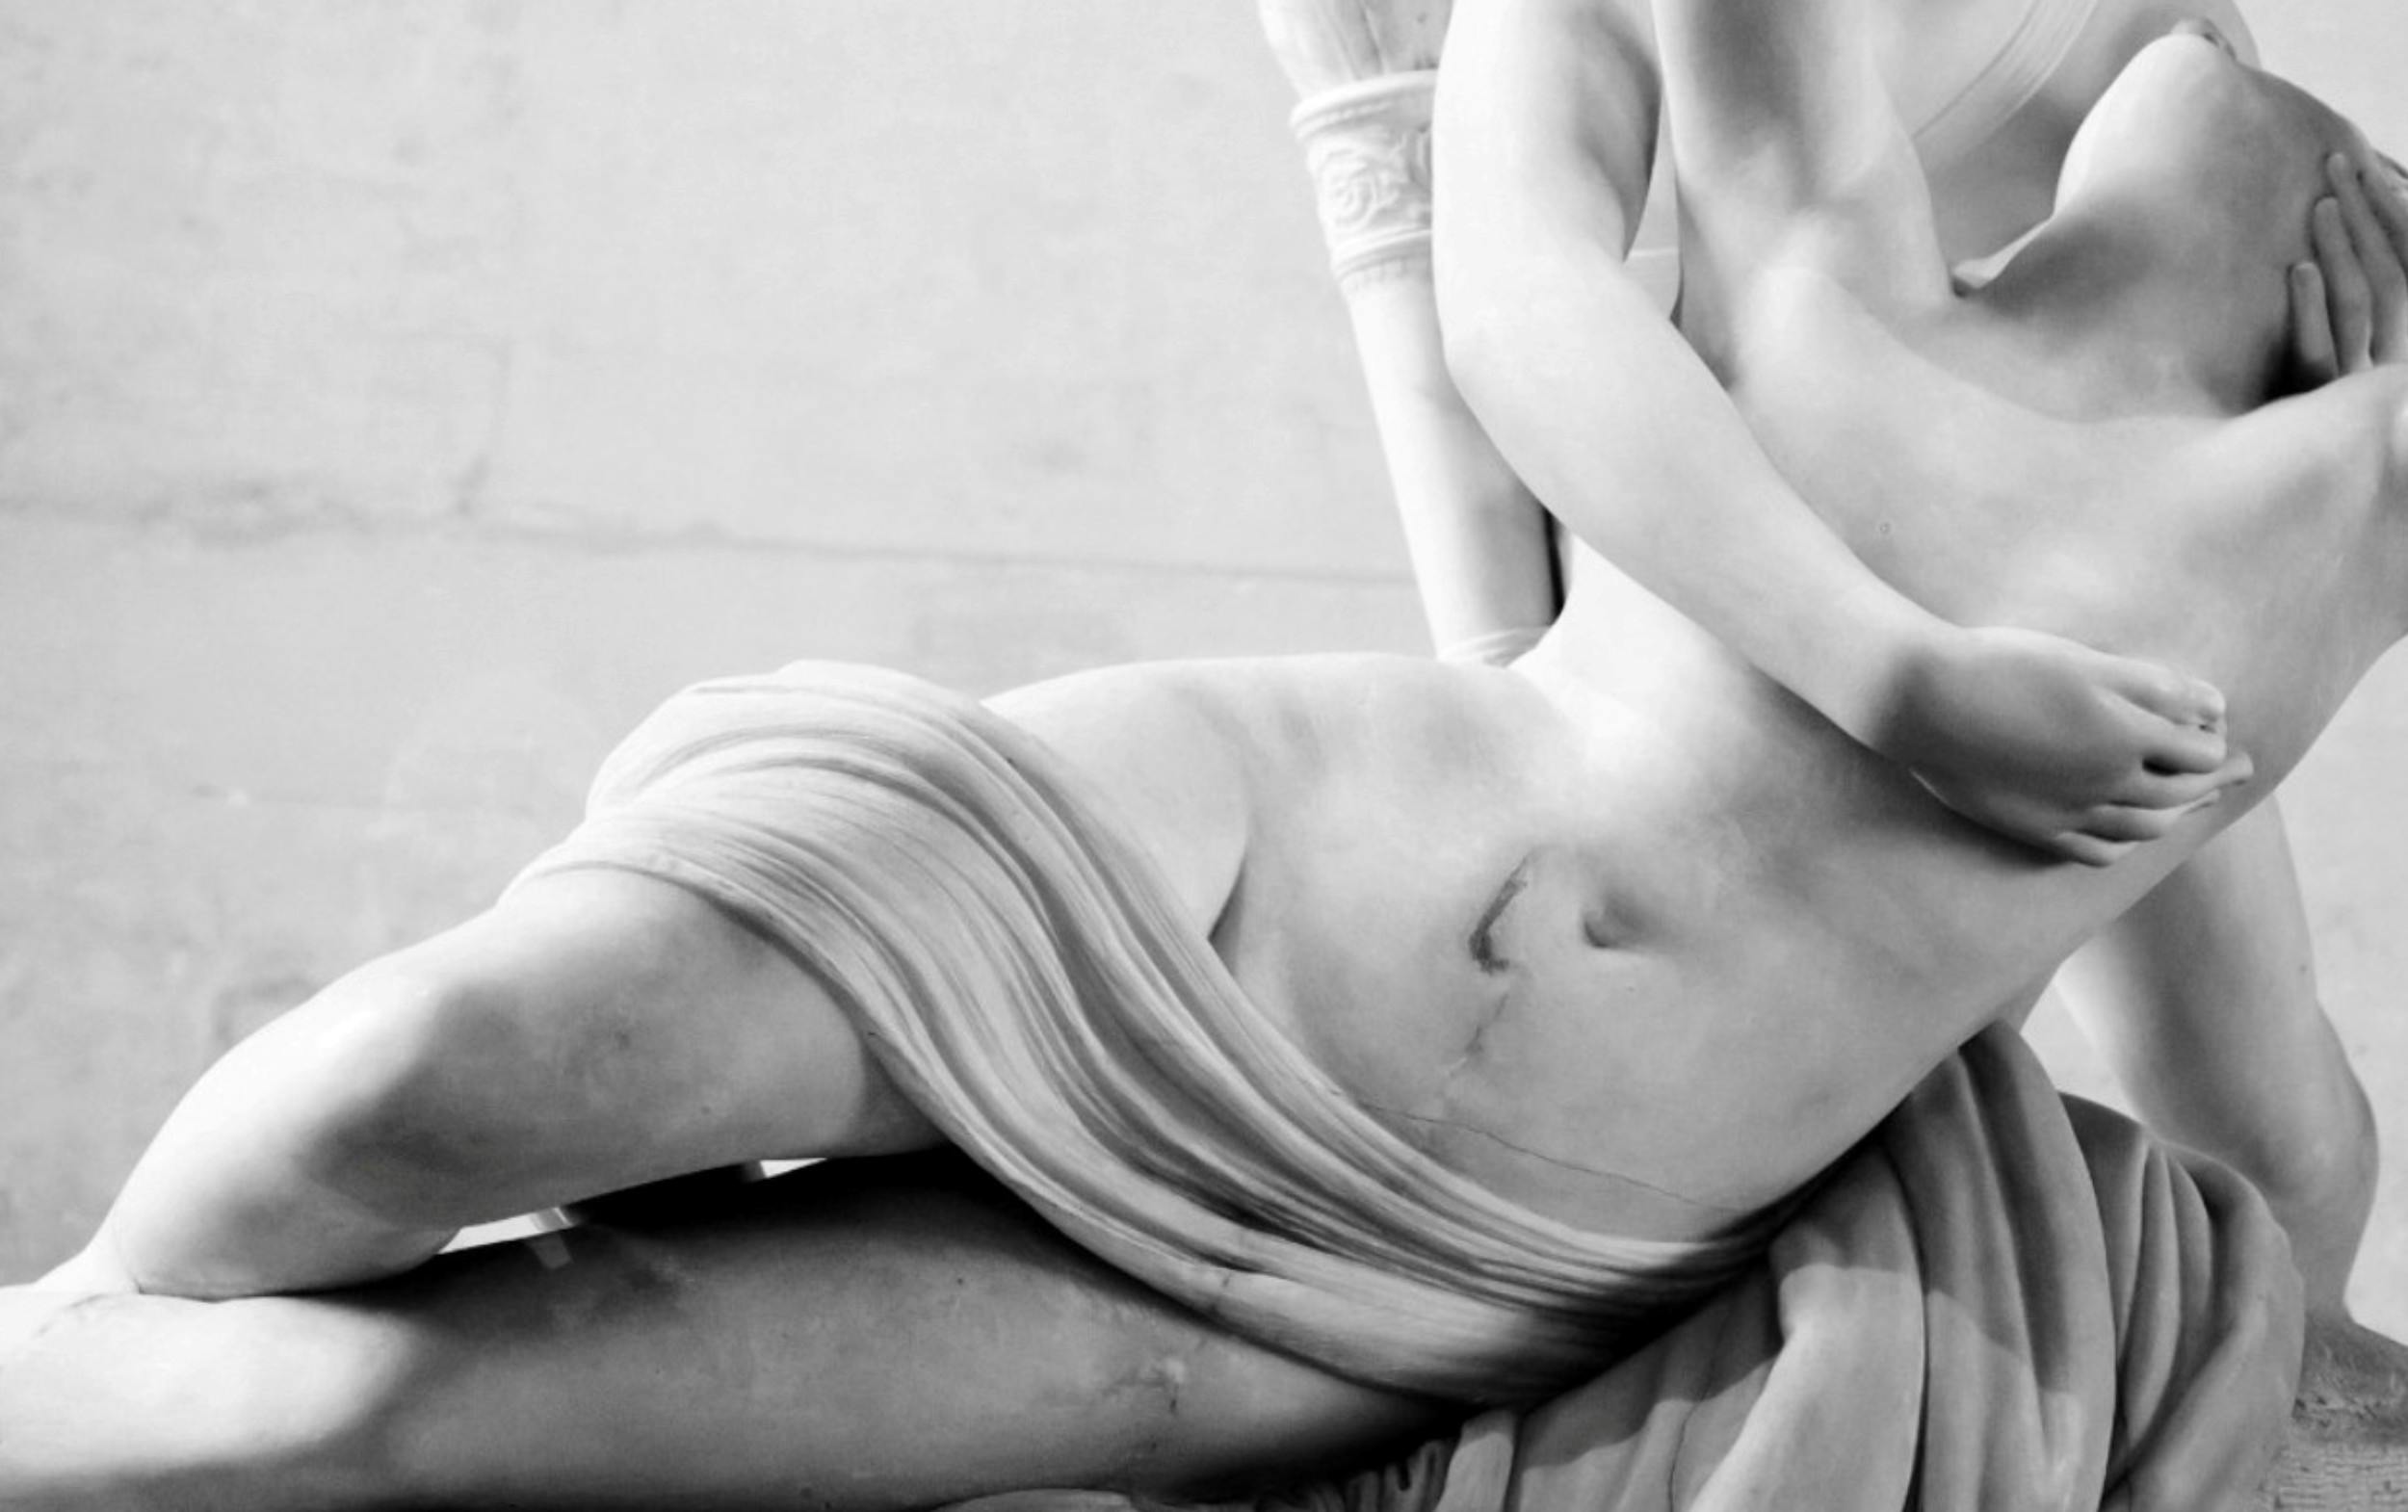 Ancient Erotica - The Erotic Bard of Ancient Rome | The New Republic